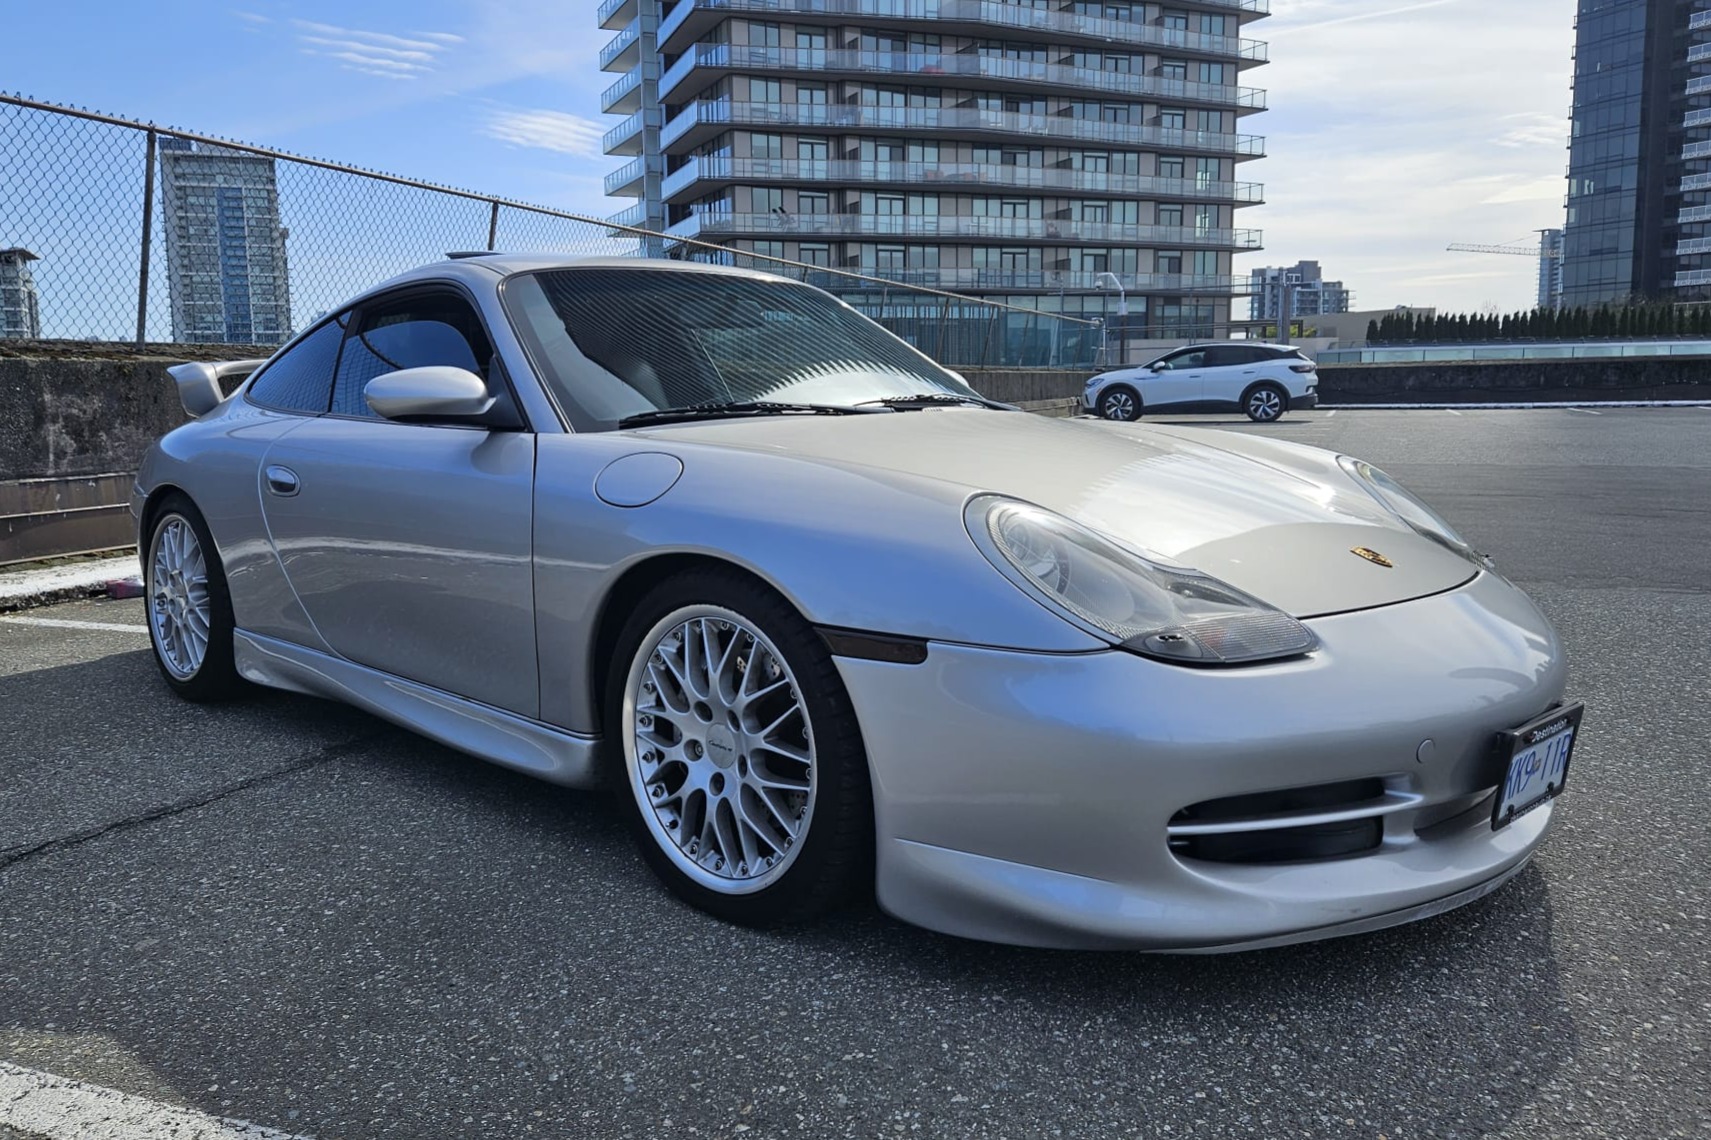 Used 1999 Porsche 911 Carrera 4 Coupe 6-Speed Review